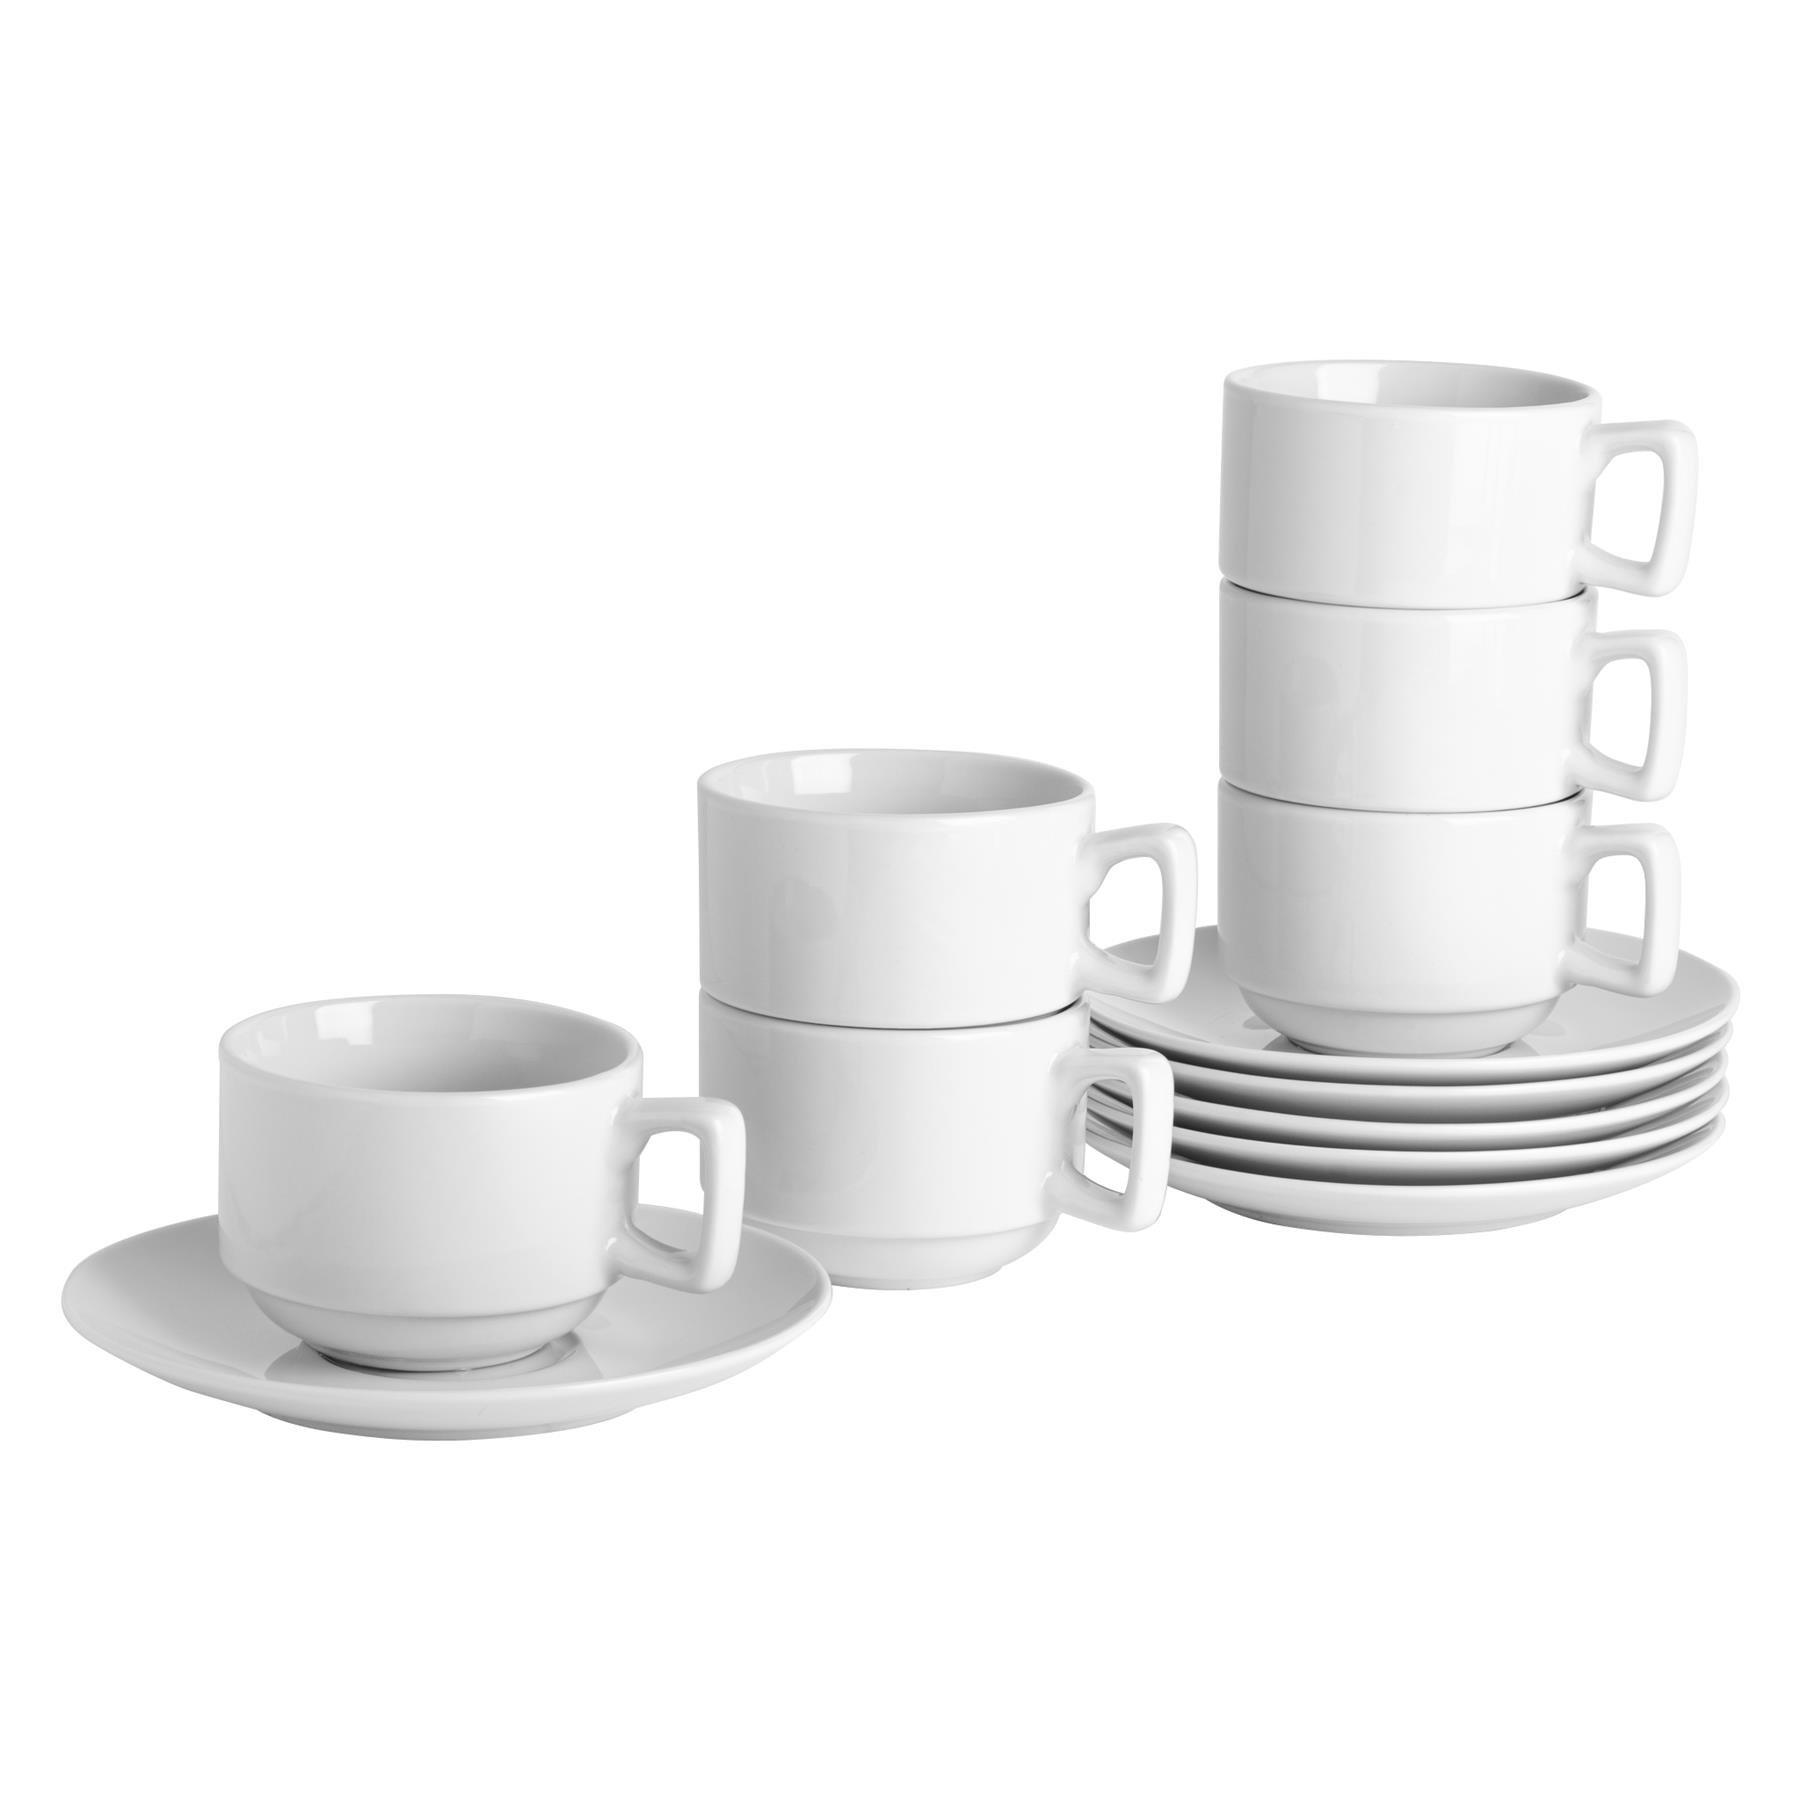 Classic White Stacking Teacup & Saucer Set - 200ml - 48 Piece